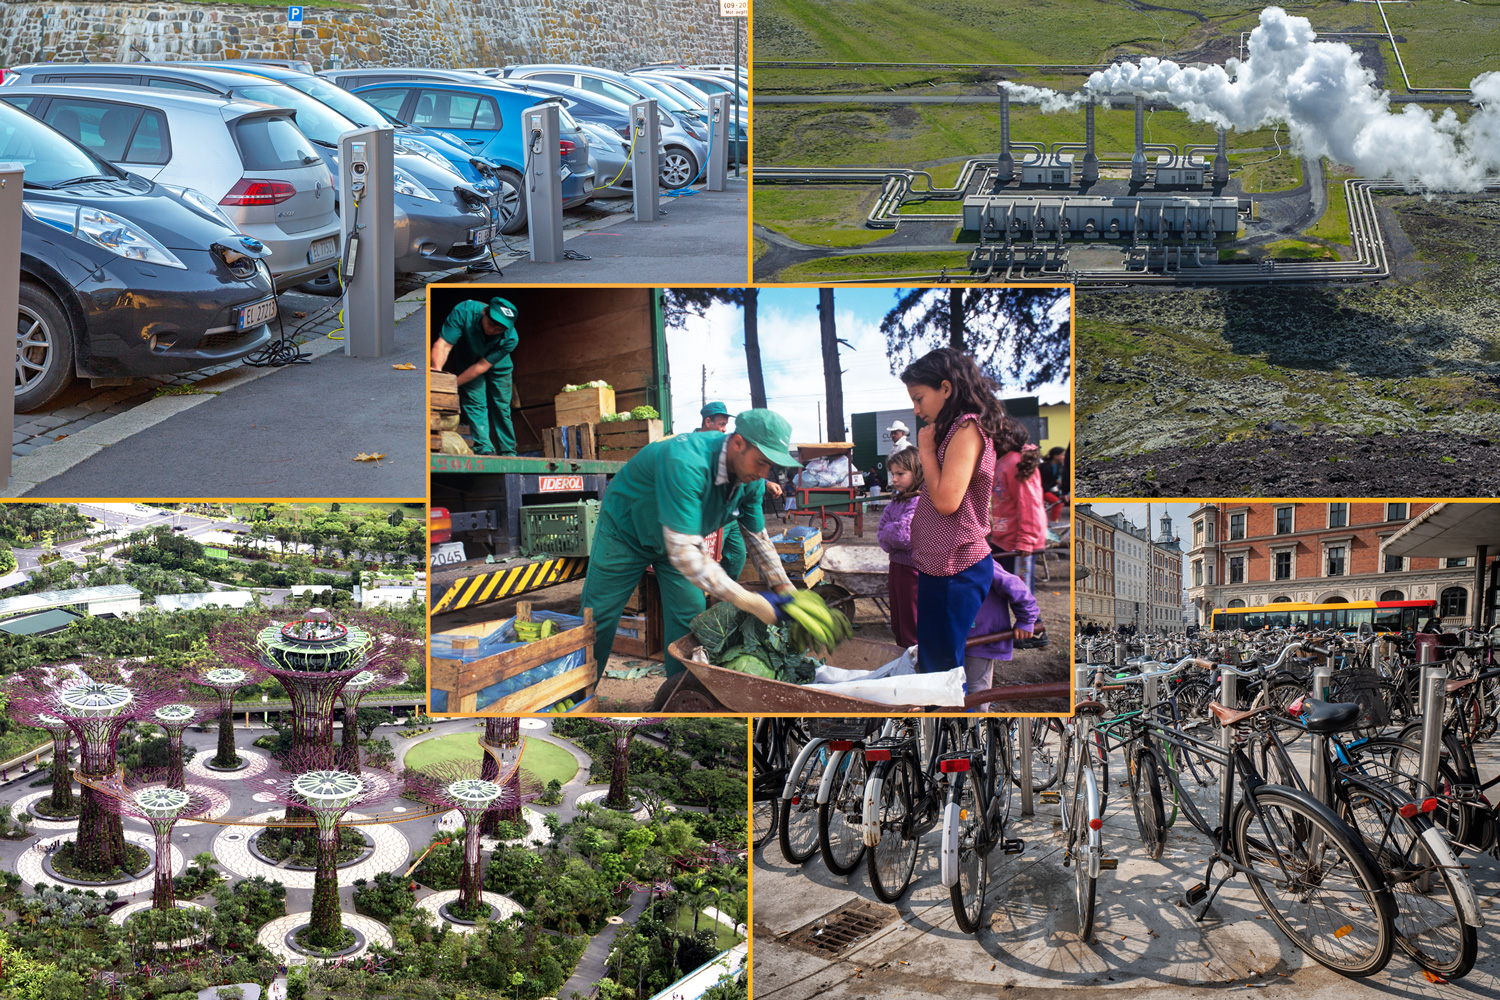 Plugged in electric cars, a geothermal plant, bikes at a bike rack, artificial trees in Singapore, and residents exchanging recyclables for produce.